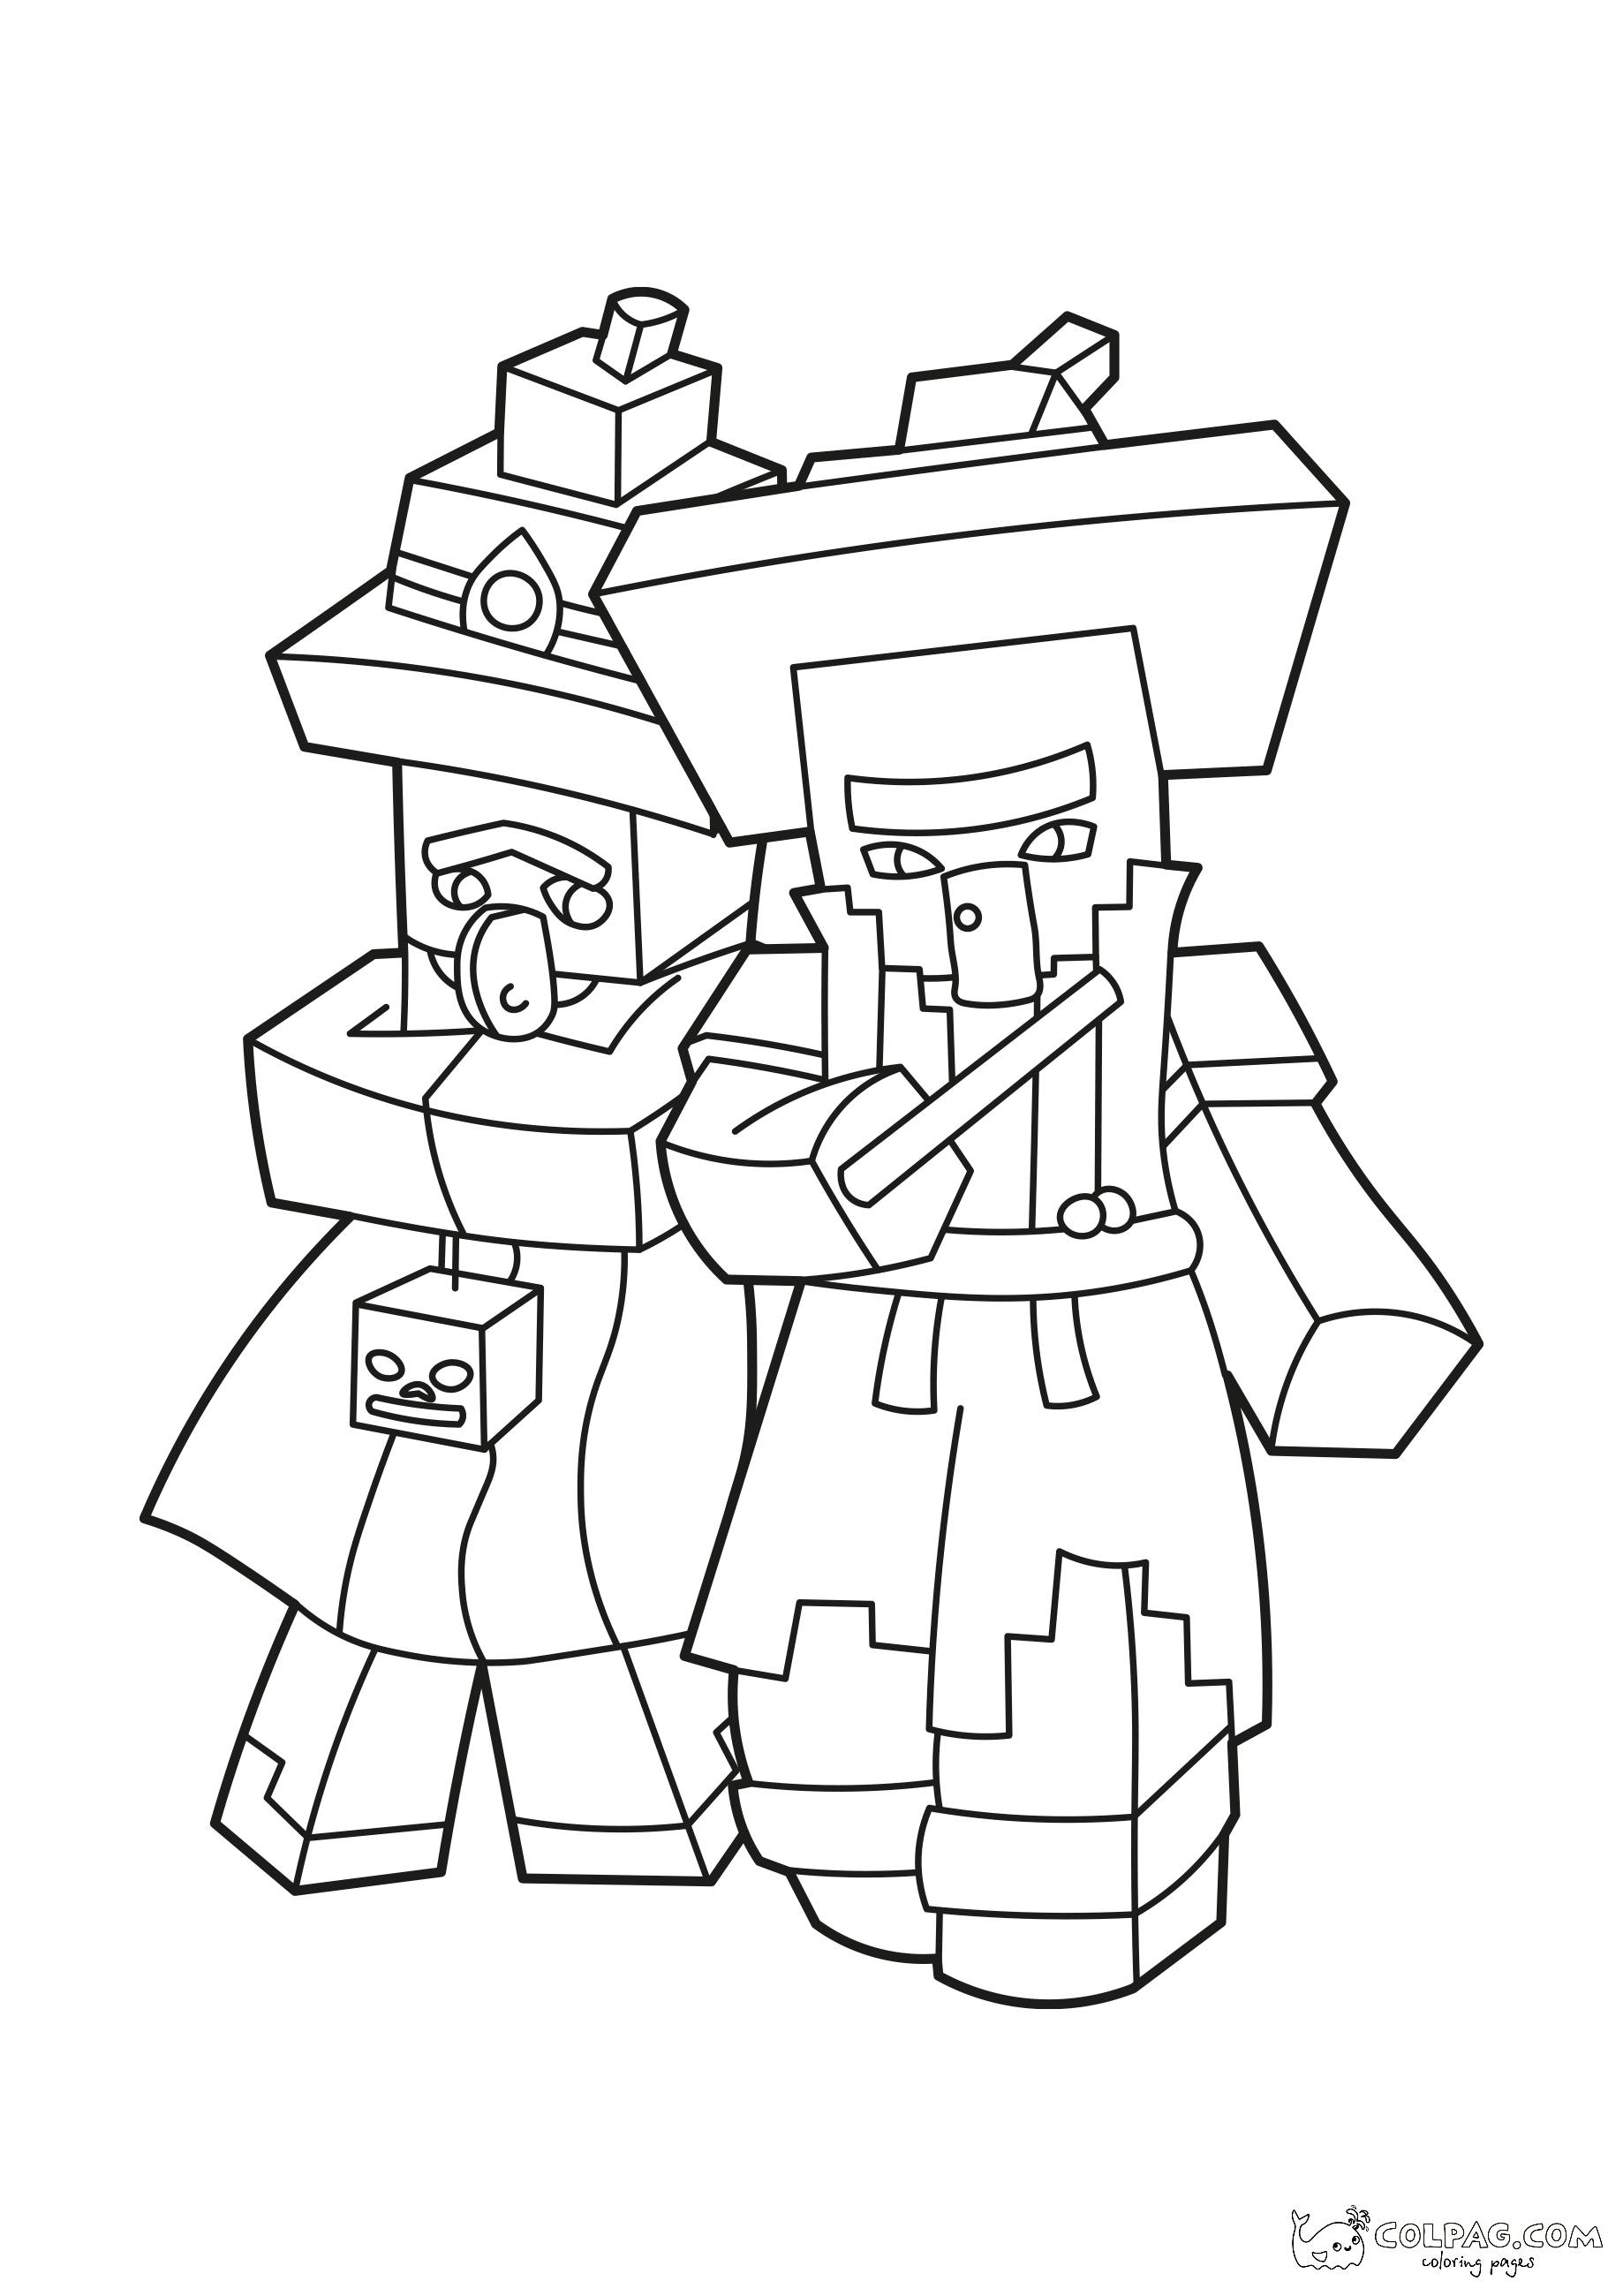 withers-minecraft-coloring-page-colpag